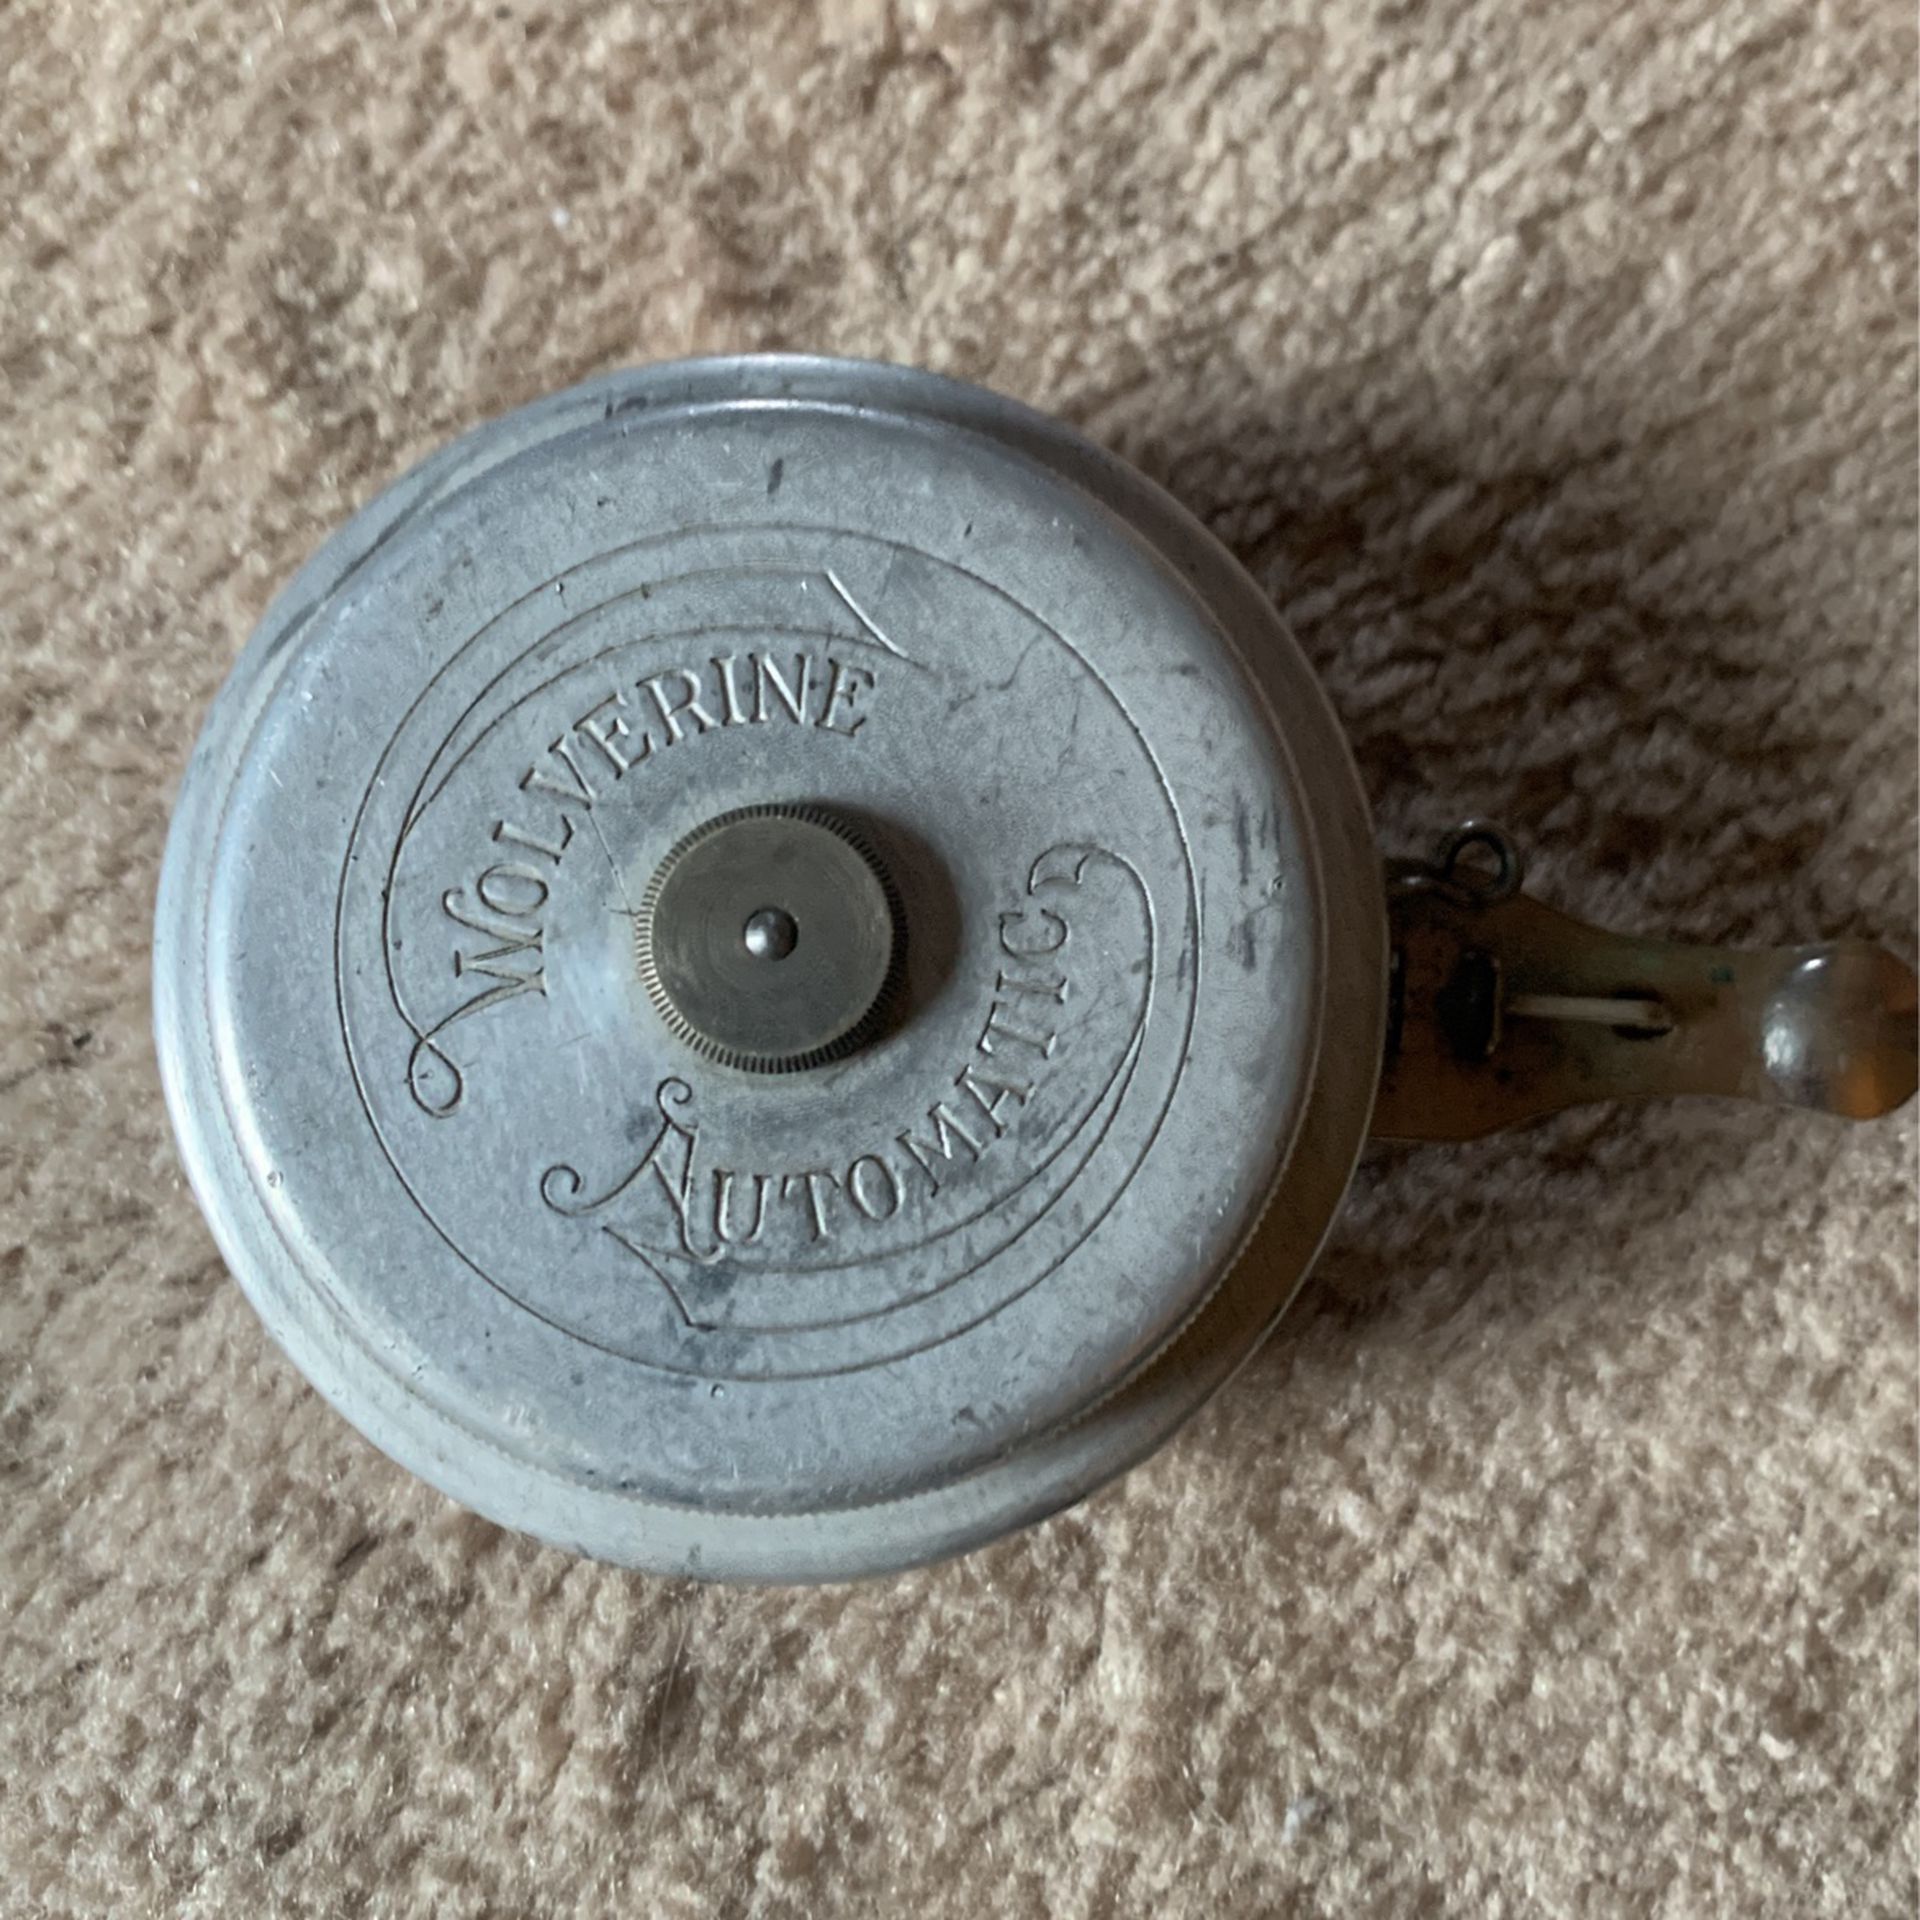 Wolverine Automatic No1695 Fishing Reel